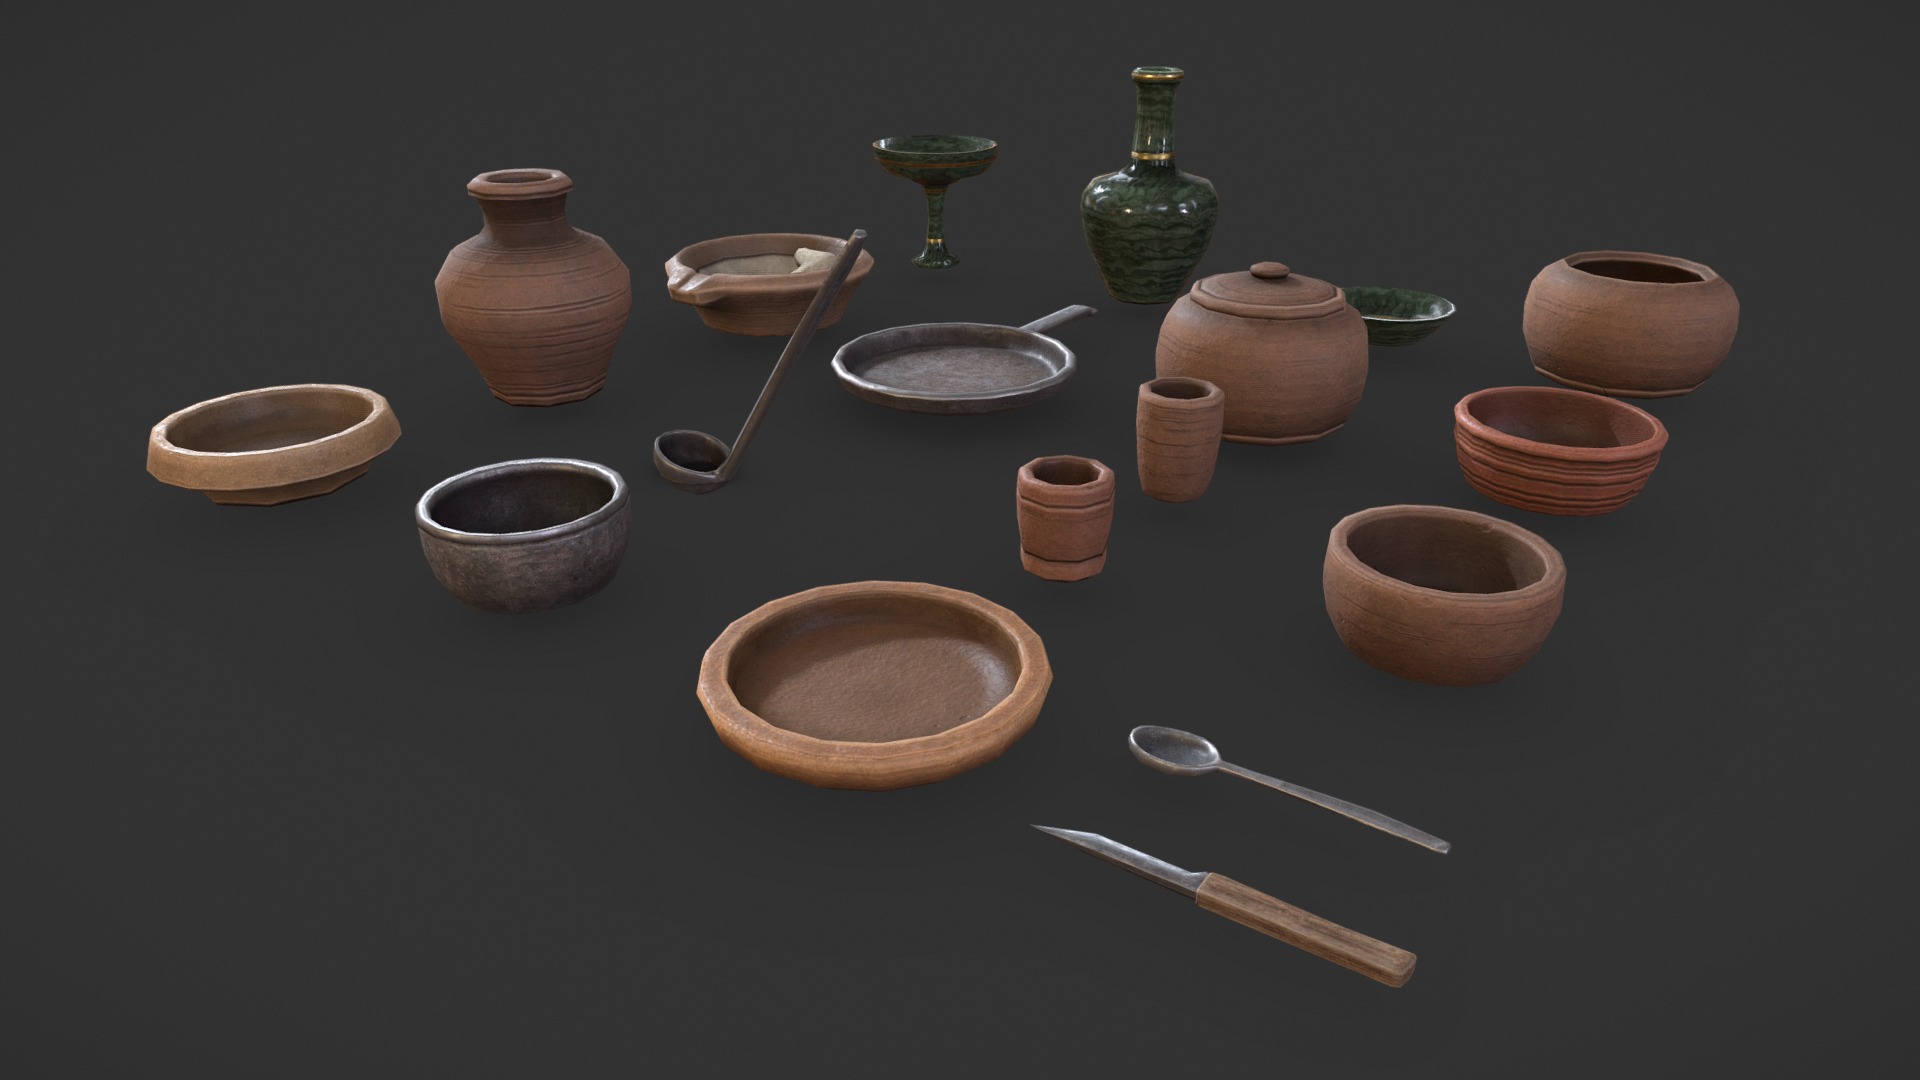 3D model PBR Tableware - This is a 3D model of the PBR Tableware. The 3D model is about a group of pots and spoons.